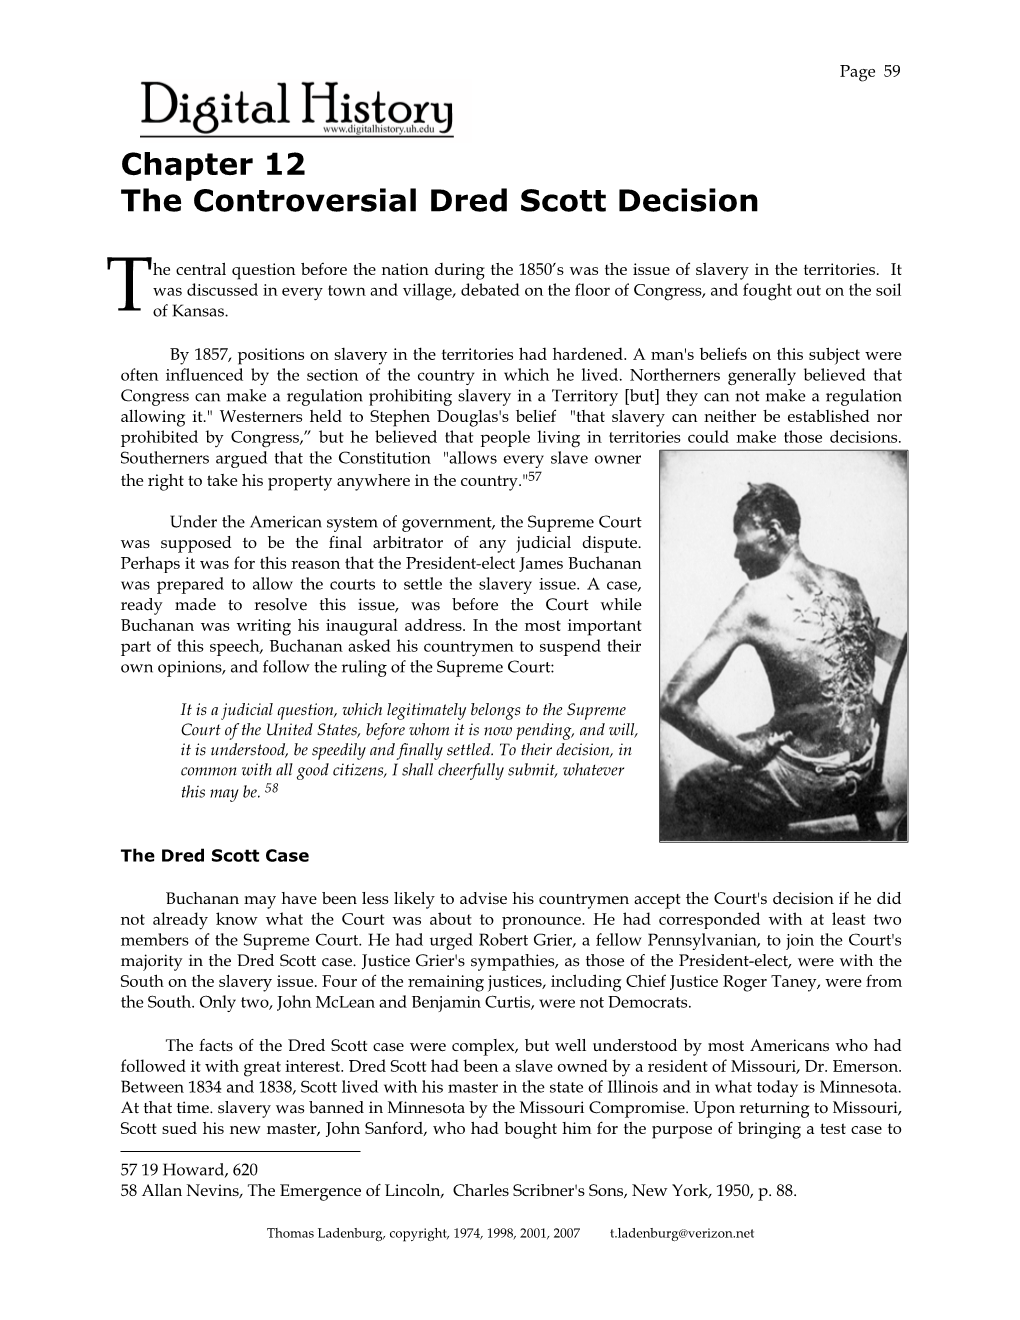 Chapter 12 the Controversial Dred Scott Decision